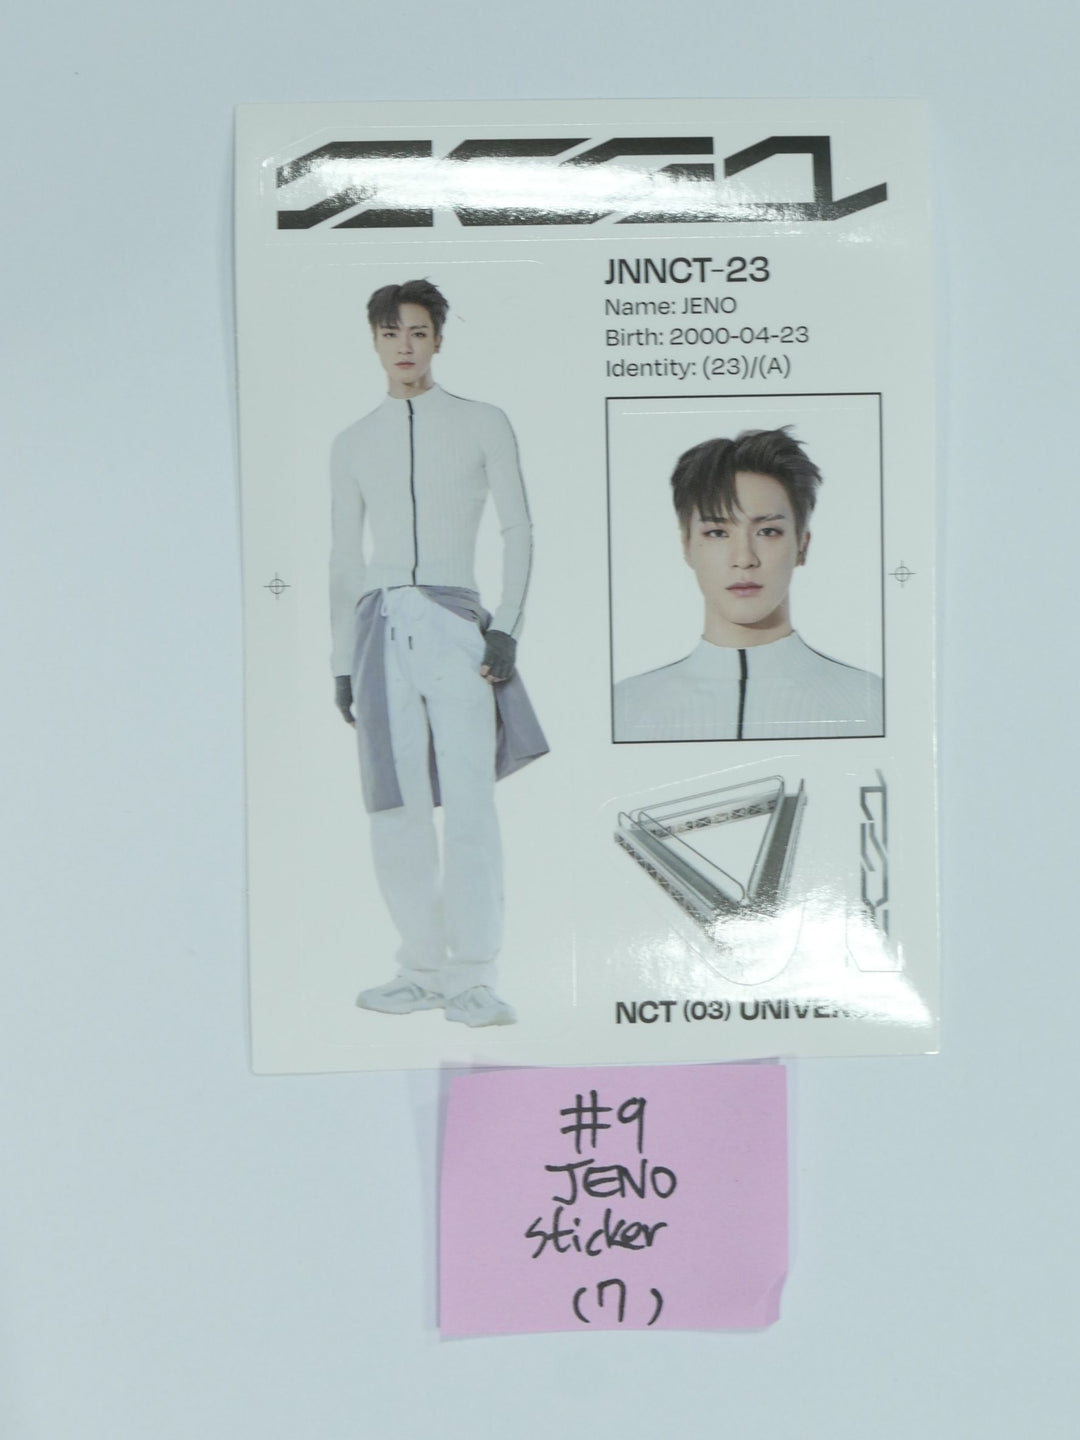 NCT "Universe - The 3rd Album" - Official Sticker